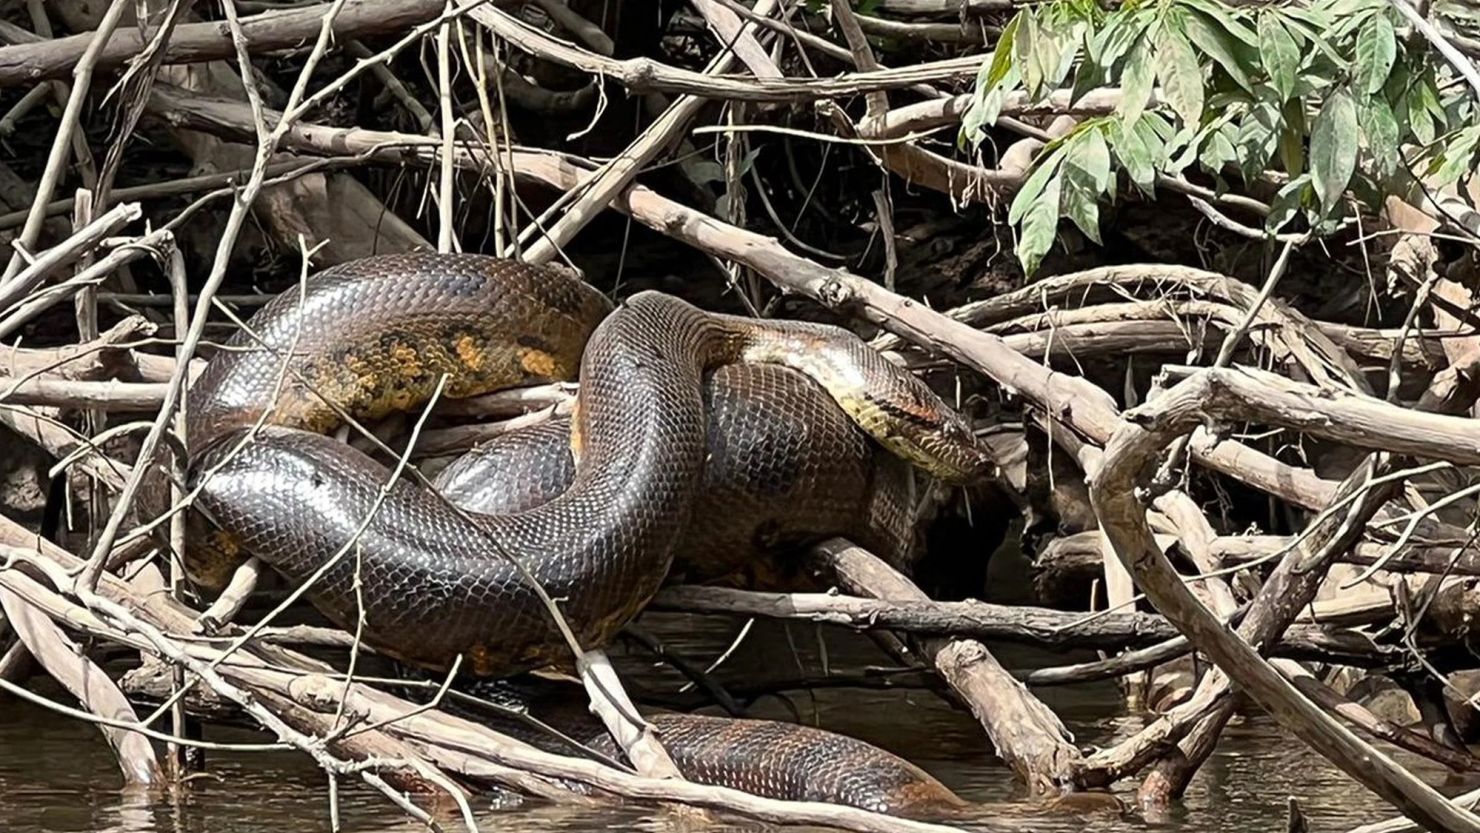 A team of scientists went to observe anacondas rumored to be the largest in existence.